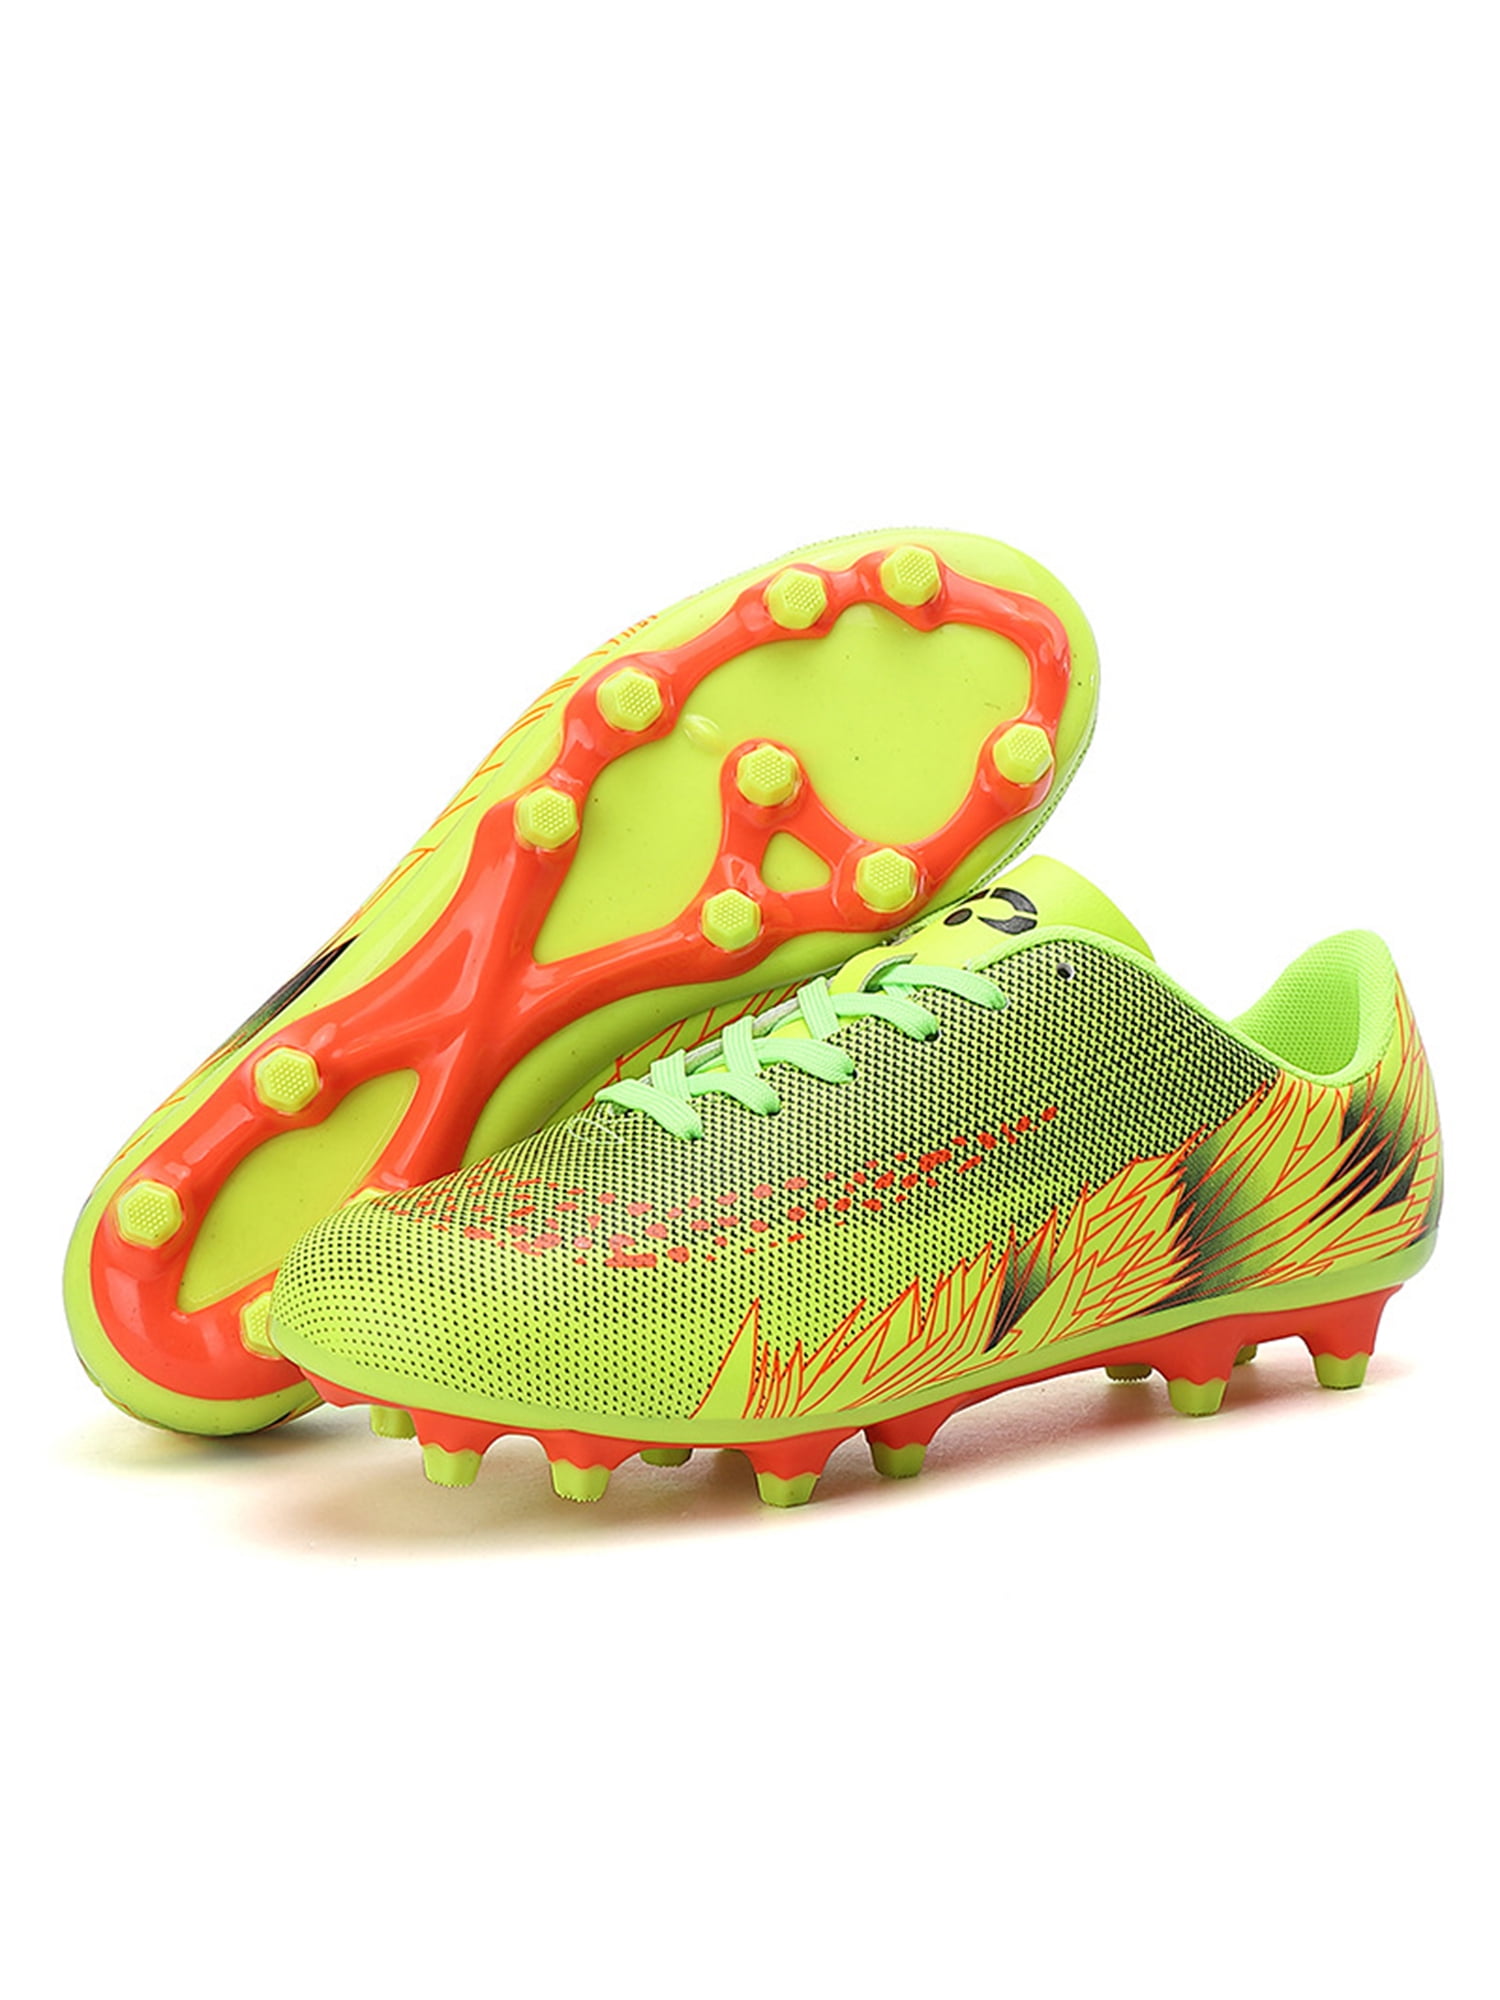 Men's Soccer Shoes Outdoor High Top Football Shoes Cleats Boots Athletic Fashion 